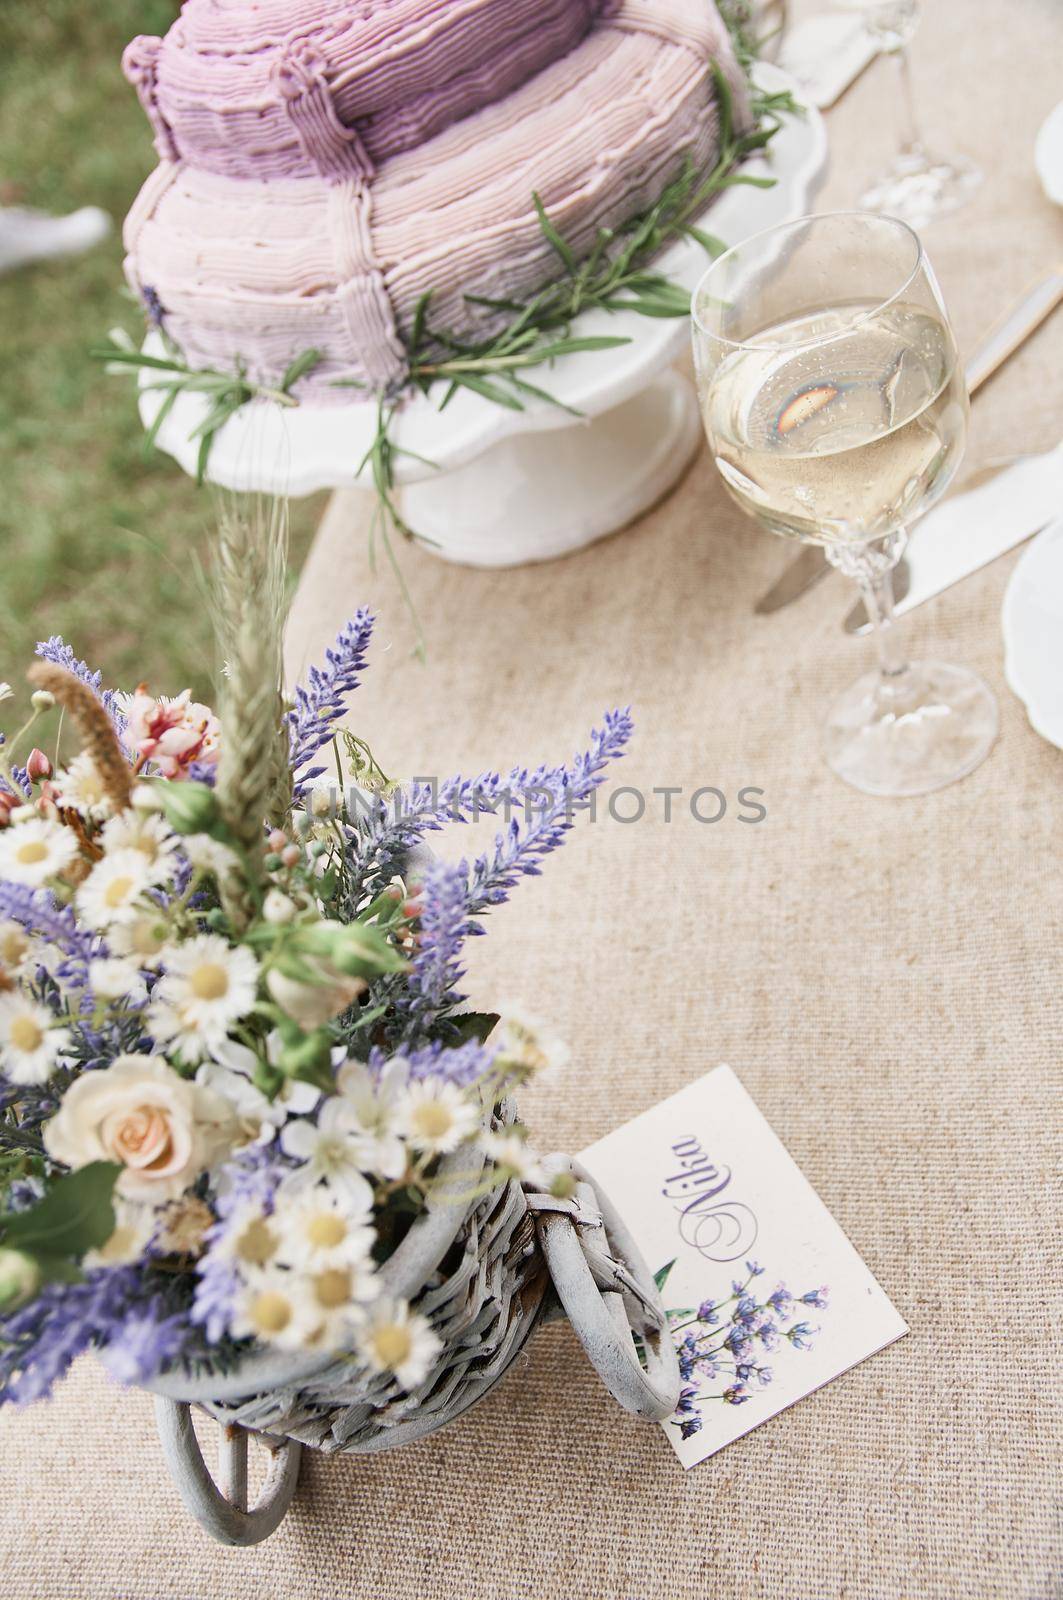 boho style wedding cake on a table covered with a linen tablecloth, with plates, glasses, knife fork and a bouquet of flowers